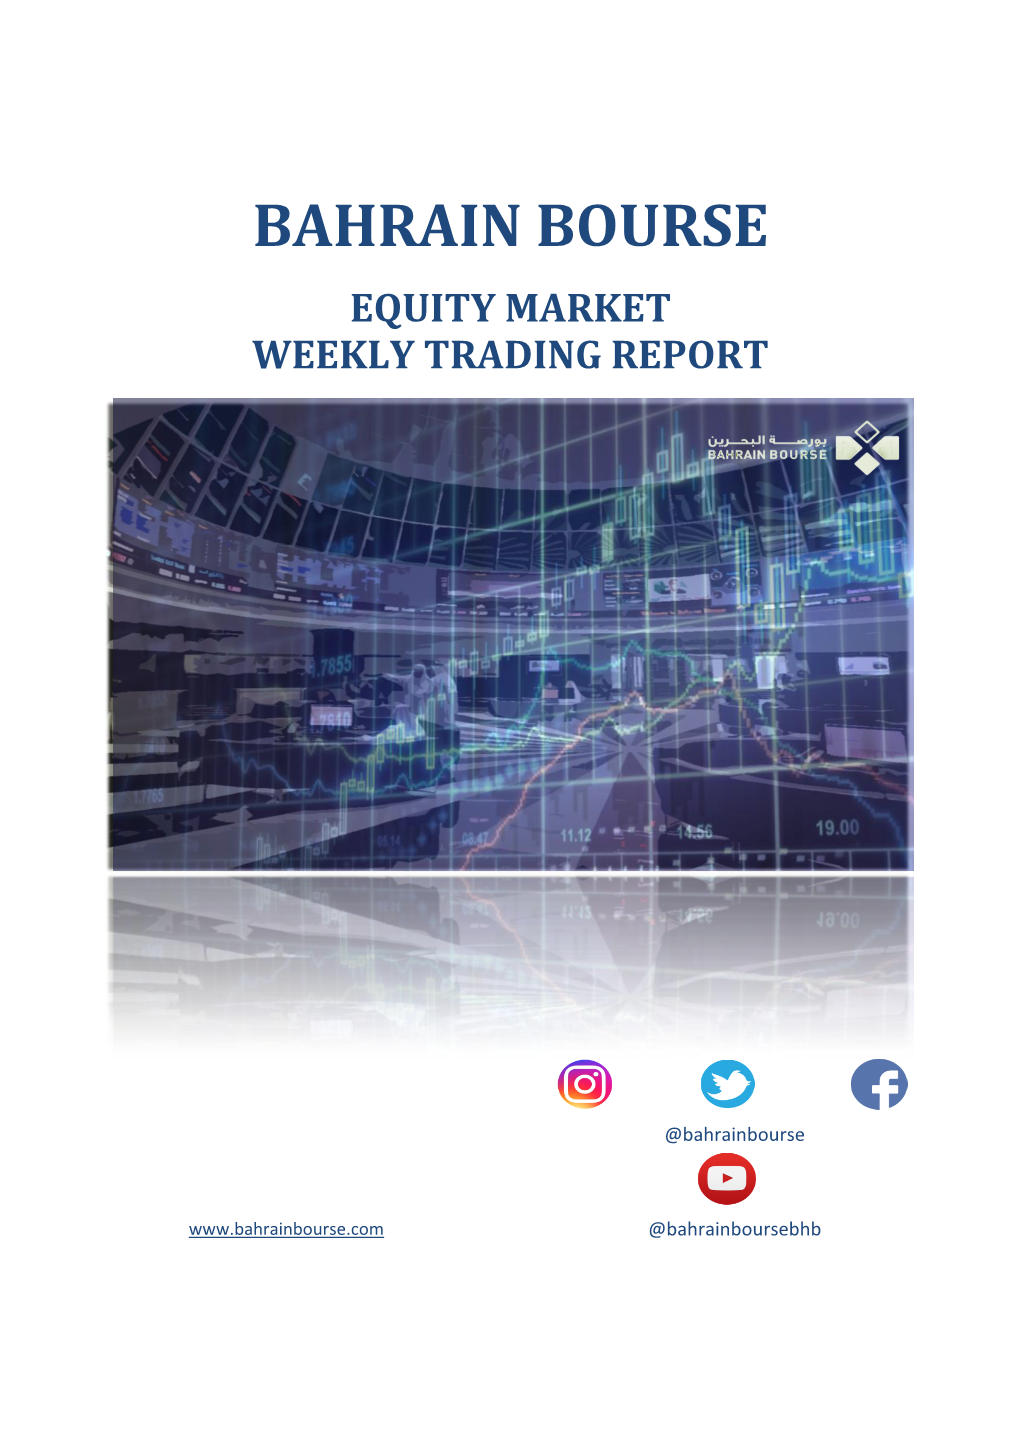 Bahrain Bourse Equity Market Weekly Trading Report